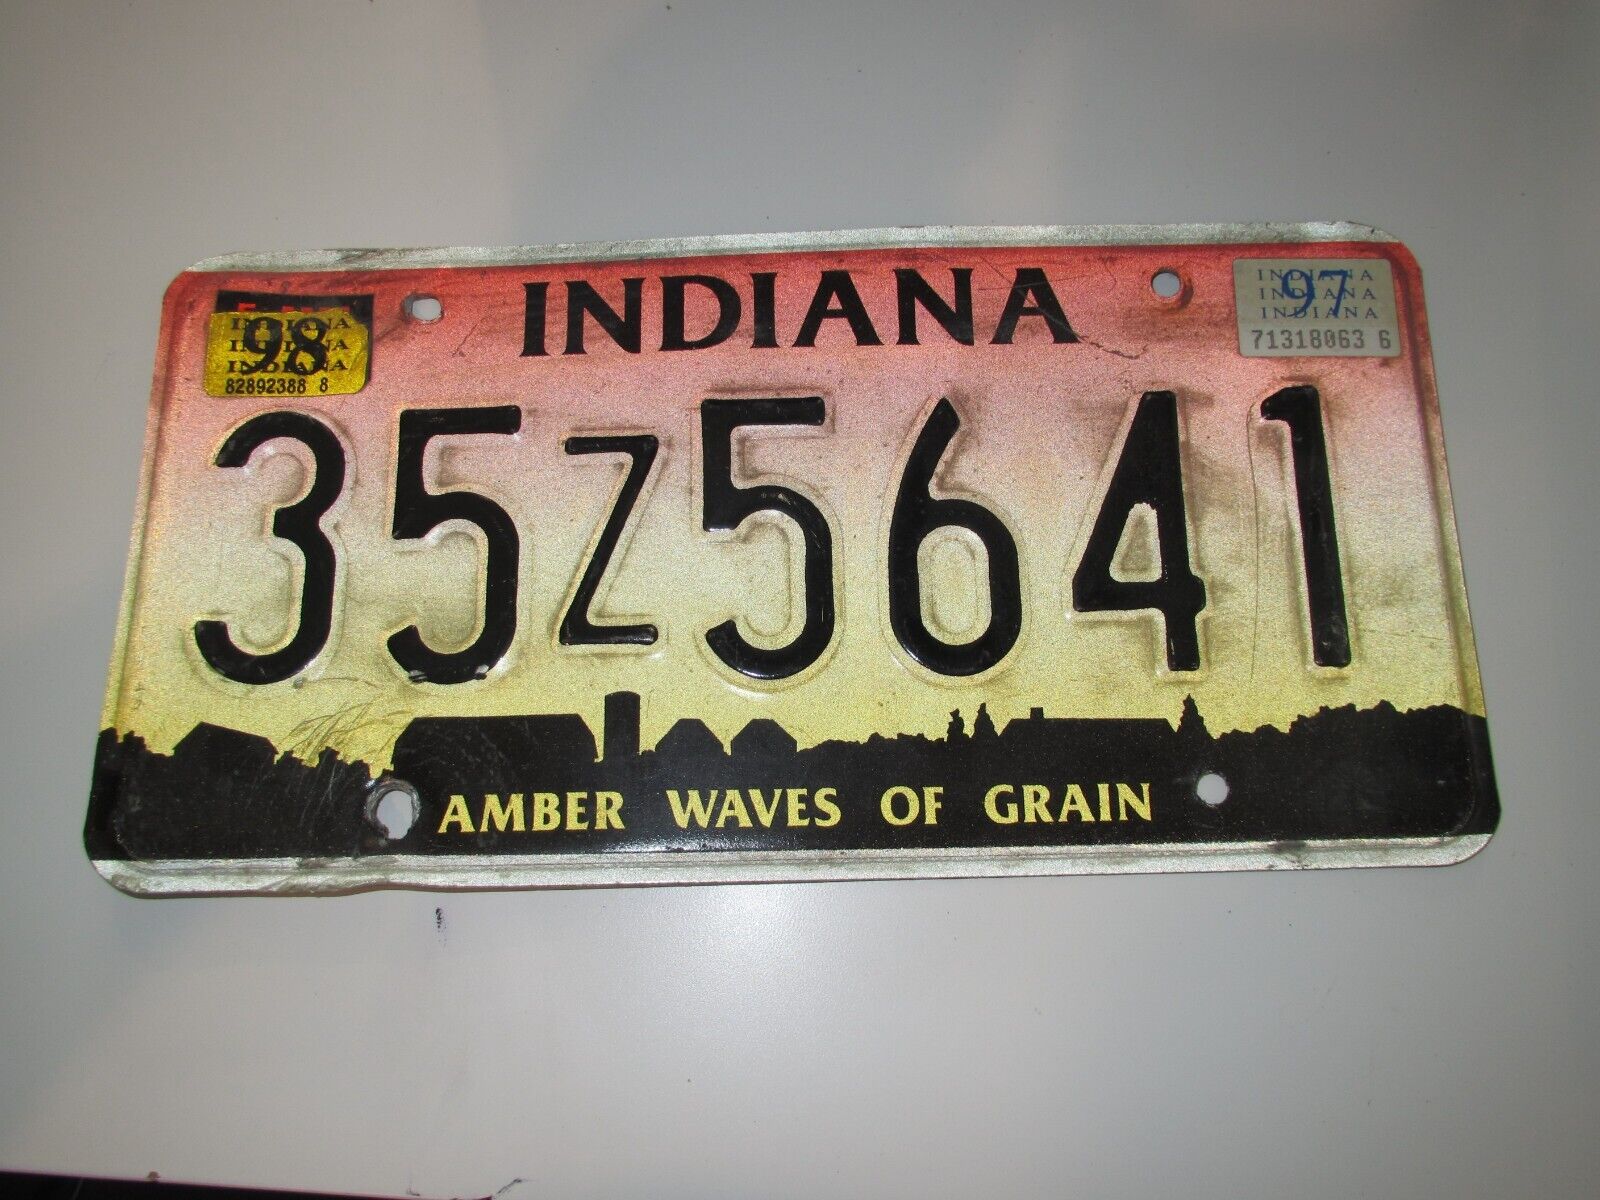 1997 98 Indiana License Plate 35z5641 AMBER WAVES OF GRAIN